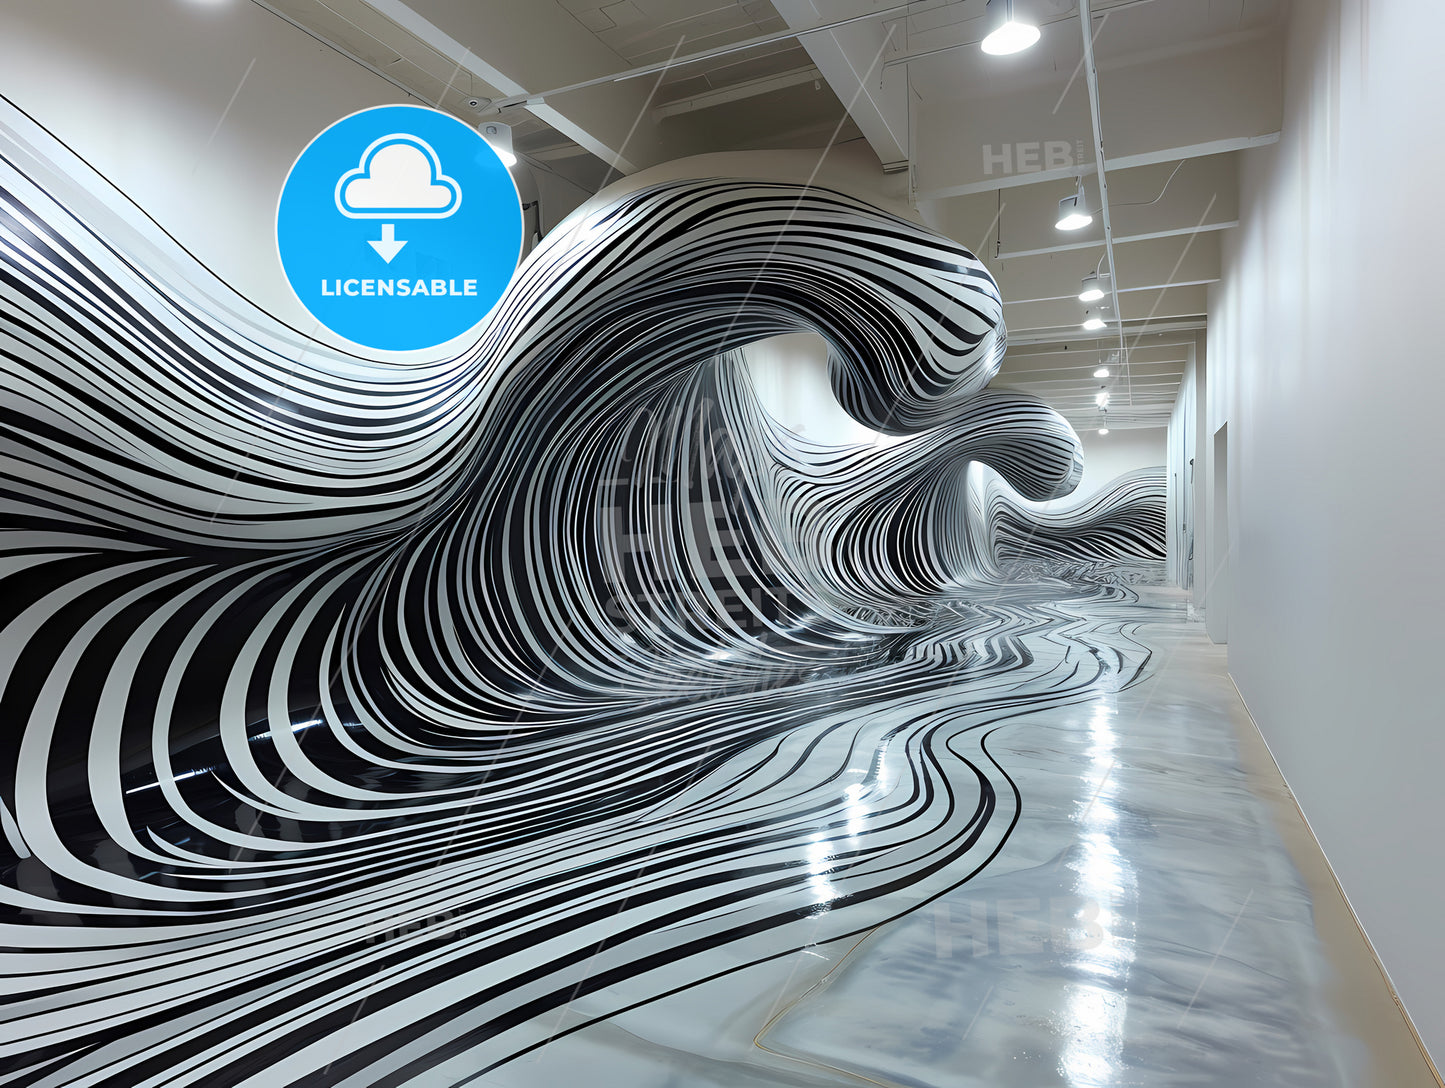 Abstract Art Of Line, A Black And White Striped Sculpture